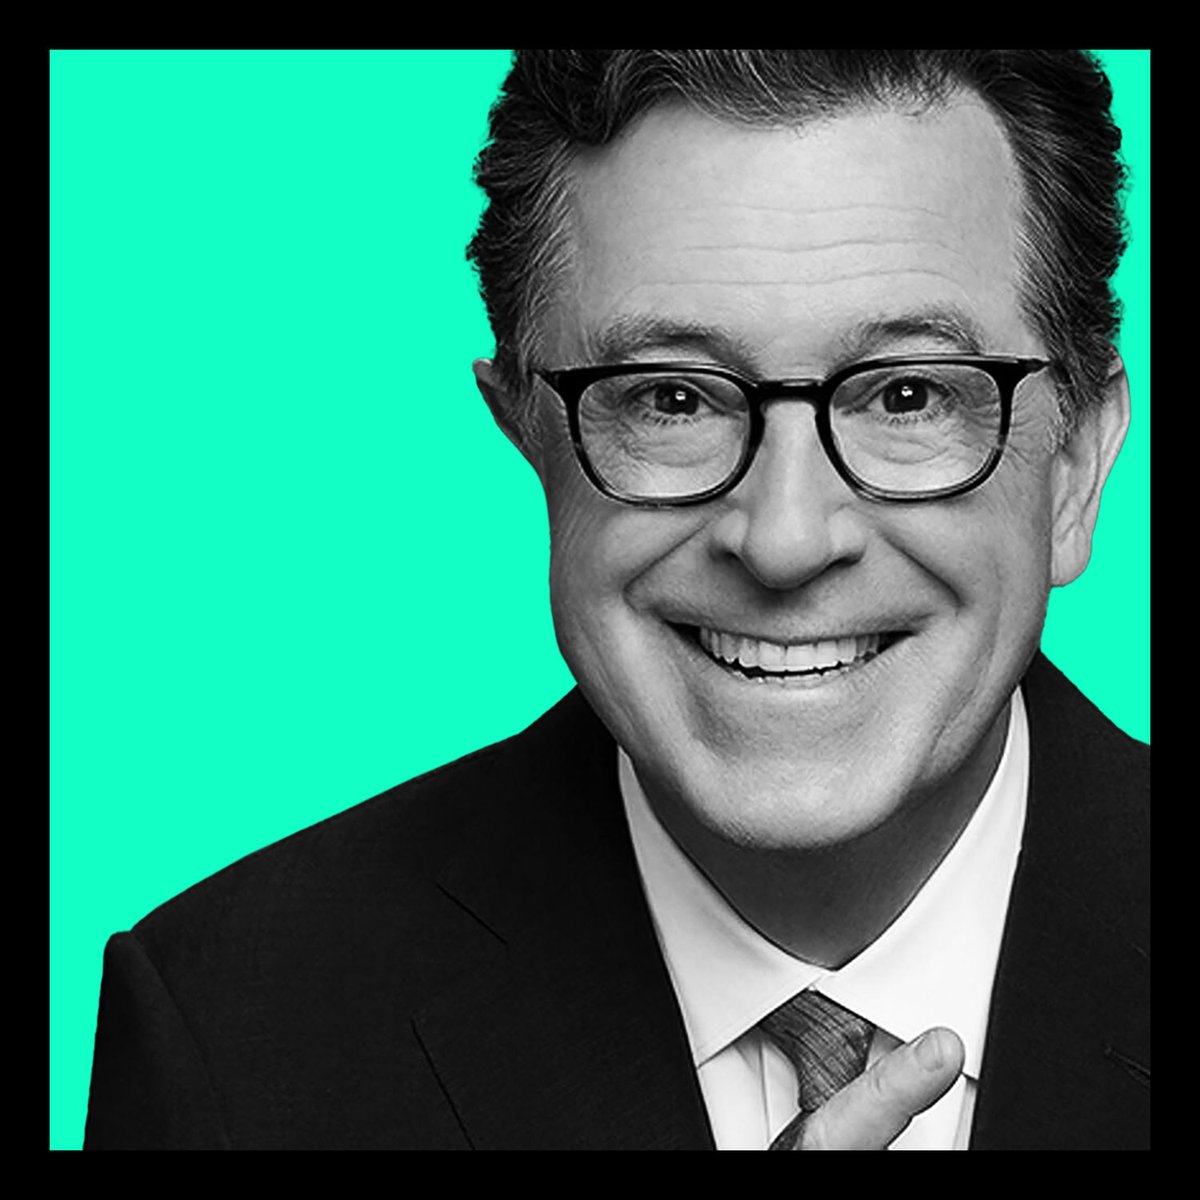 'I would say laughter is the best medicine. But it's more than that. It's an entire regime of antibiotics and steroids. Laughter brings the swelling down on our national psyche and then applies an antibiotic cream. You gotta keep it away from your eyes.' - Stephen Colbert #HBD